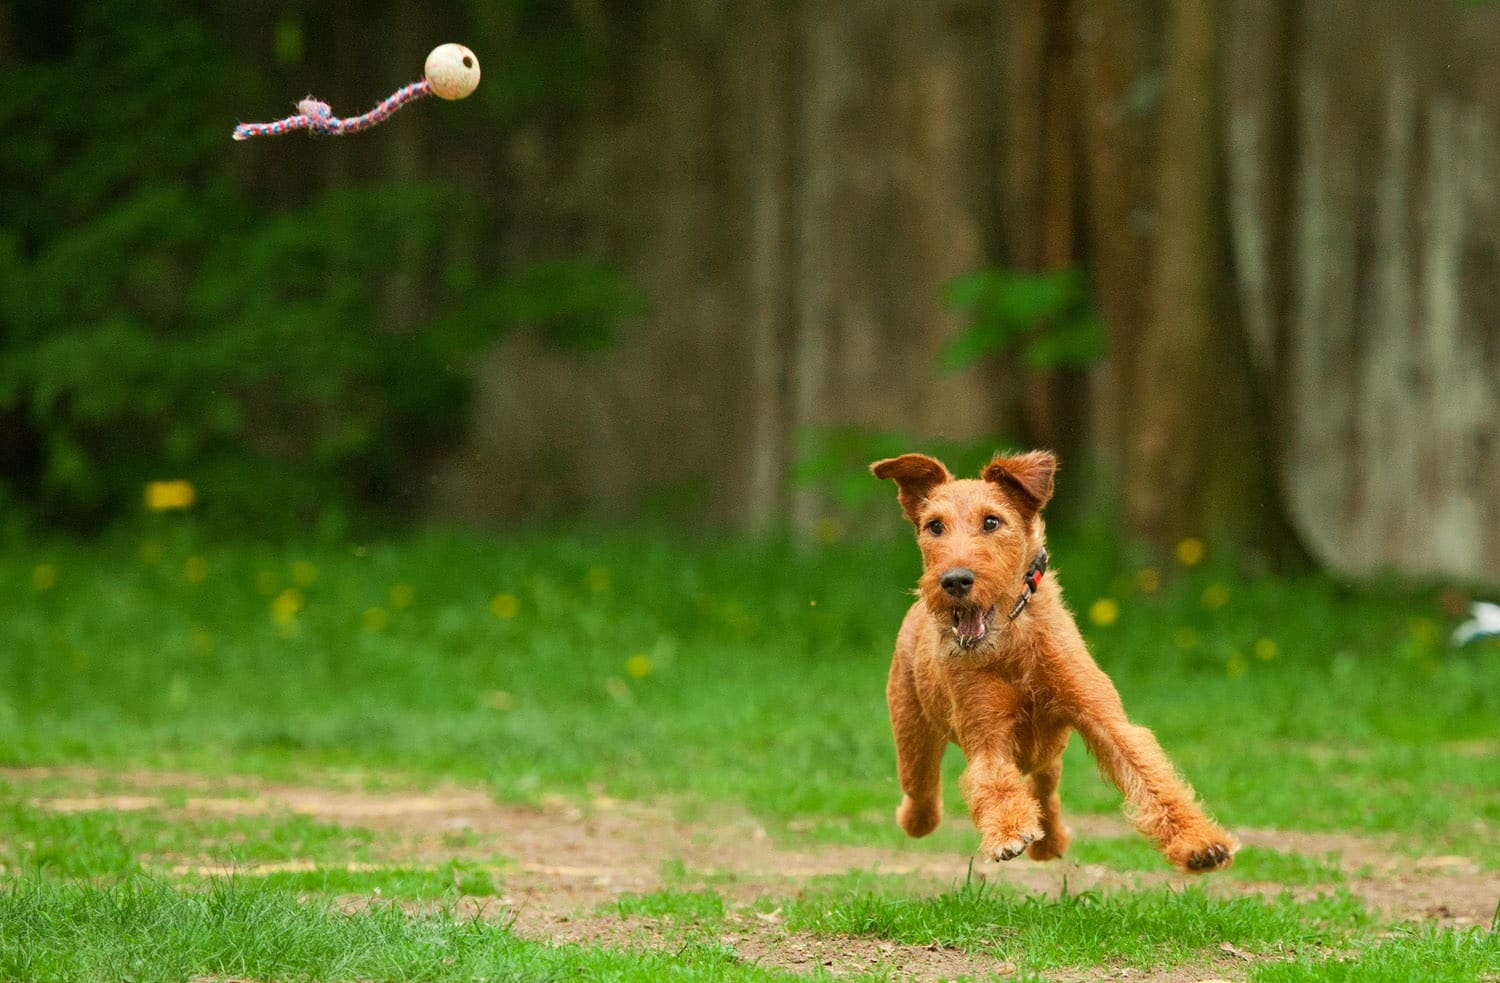 Irish terrier playing fetch with ball